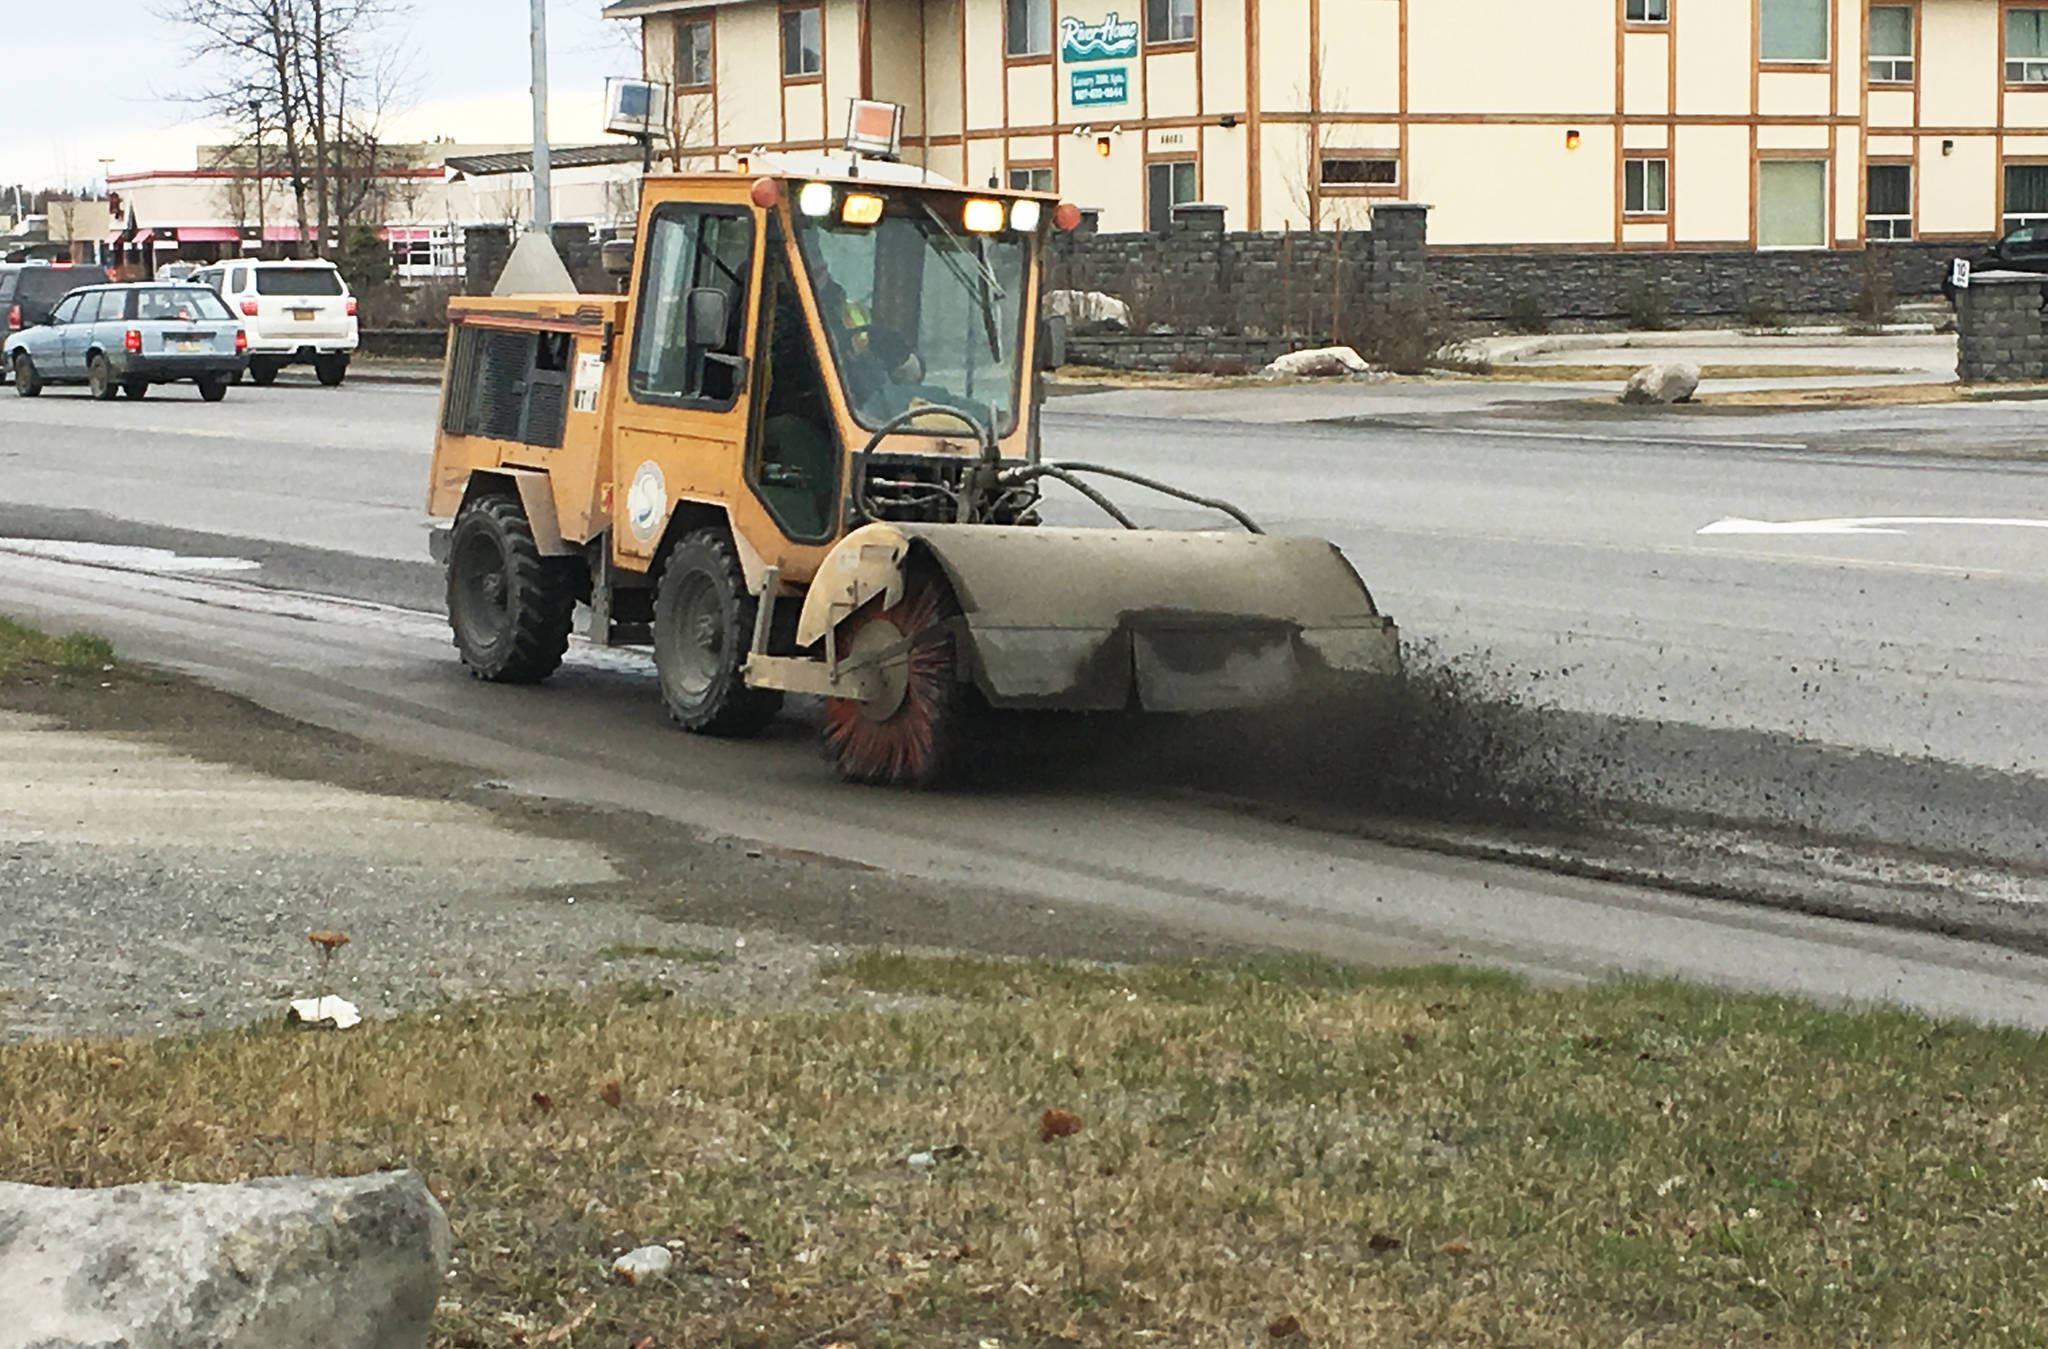 This April 2016 photo shows City of Soldotna crew cleaning along the Sterling Highway under ‘wet’ conditions. An ordinance passed last summer sets standards for clearing sand from streets and parking lots in order to reduce the amount of dust that gets into the air. (Photo courtesy Scott Sundberg, Soldotna Maintenance Department Manager)